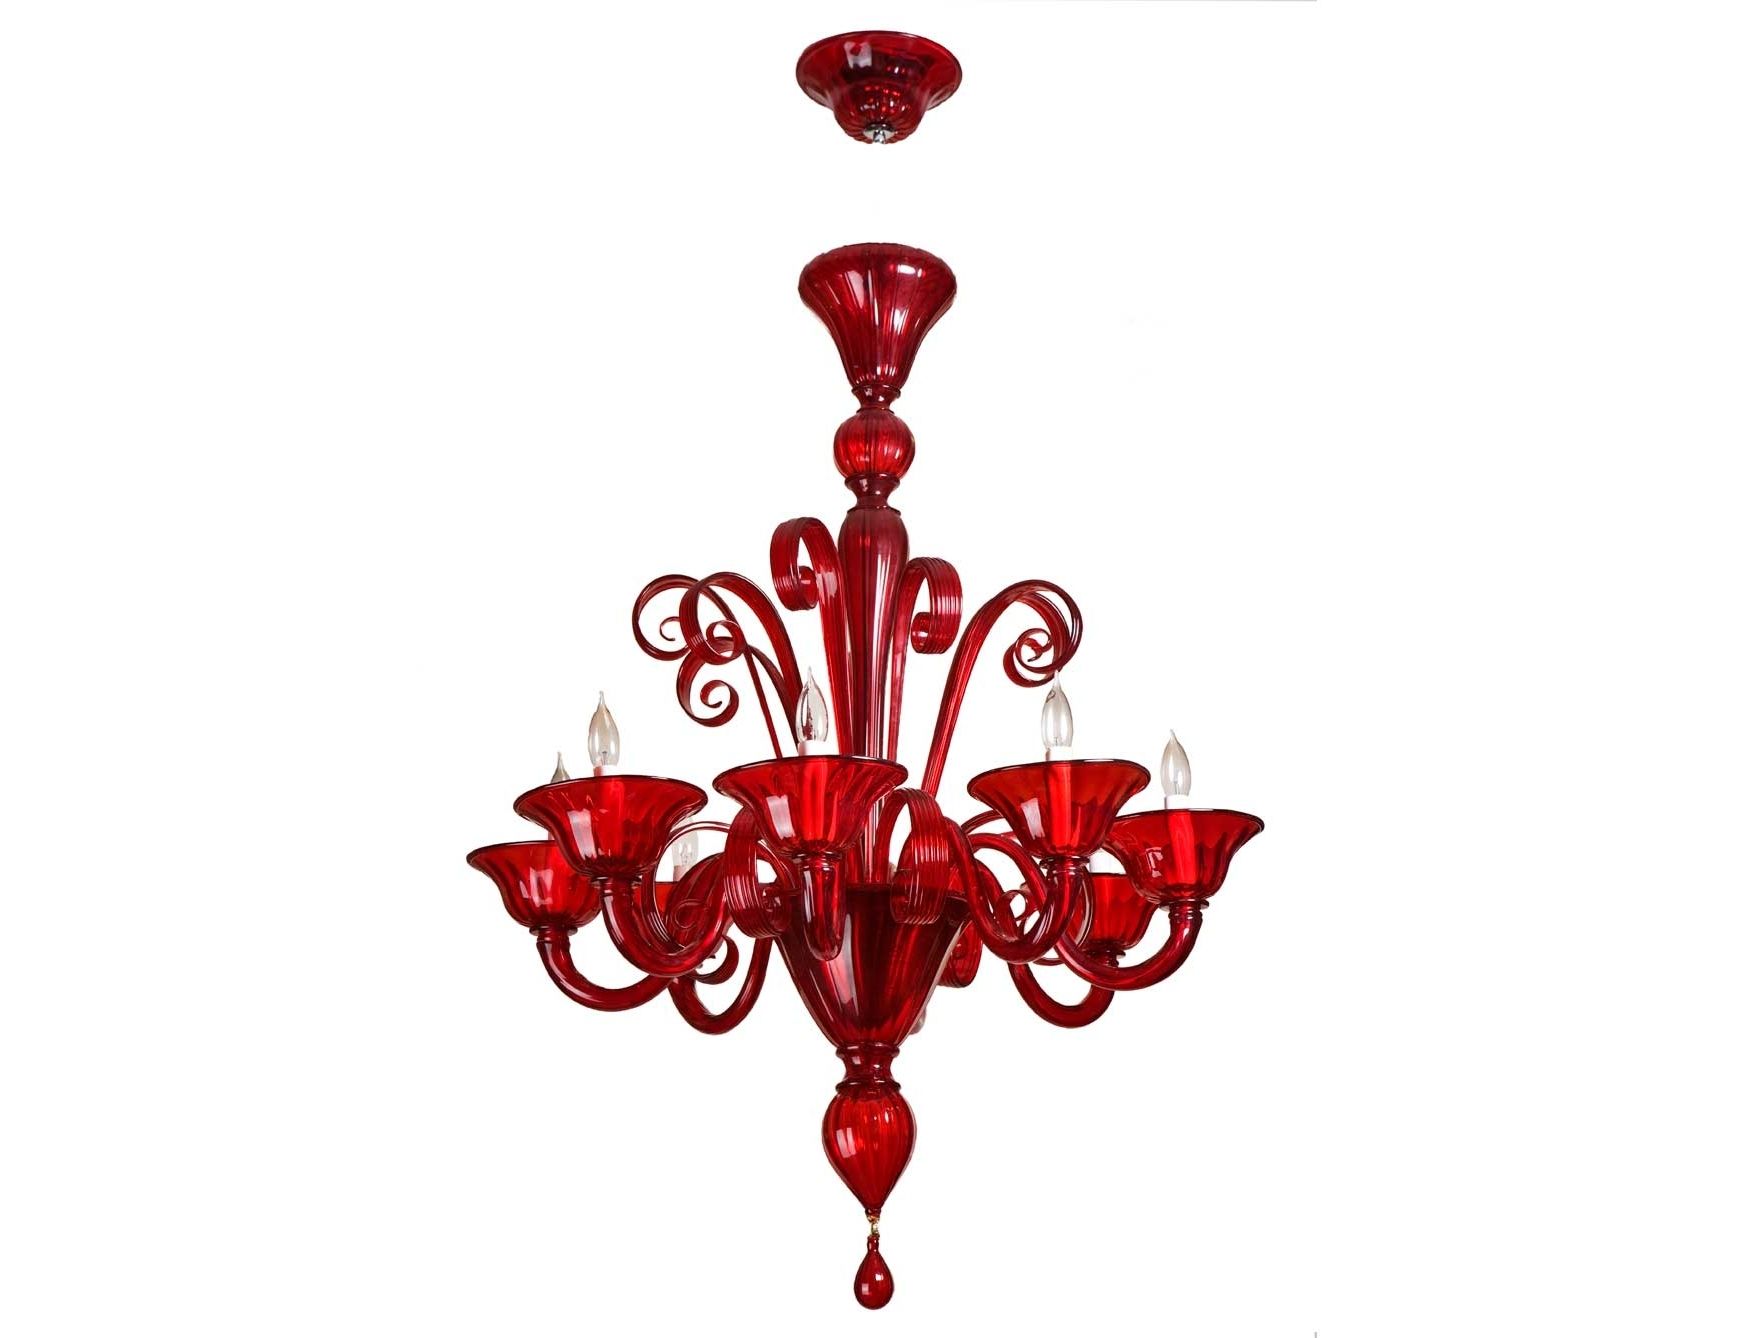 Modern Red Chandelier With Regard To Most Recent Red Chandelier Light – Chandelier Designs (View 1 of 20)